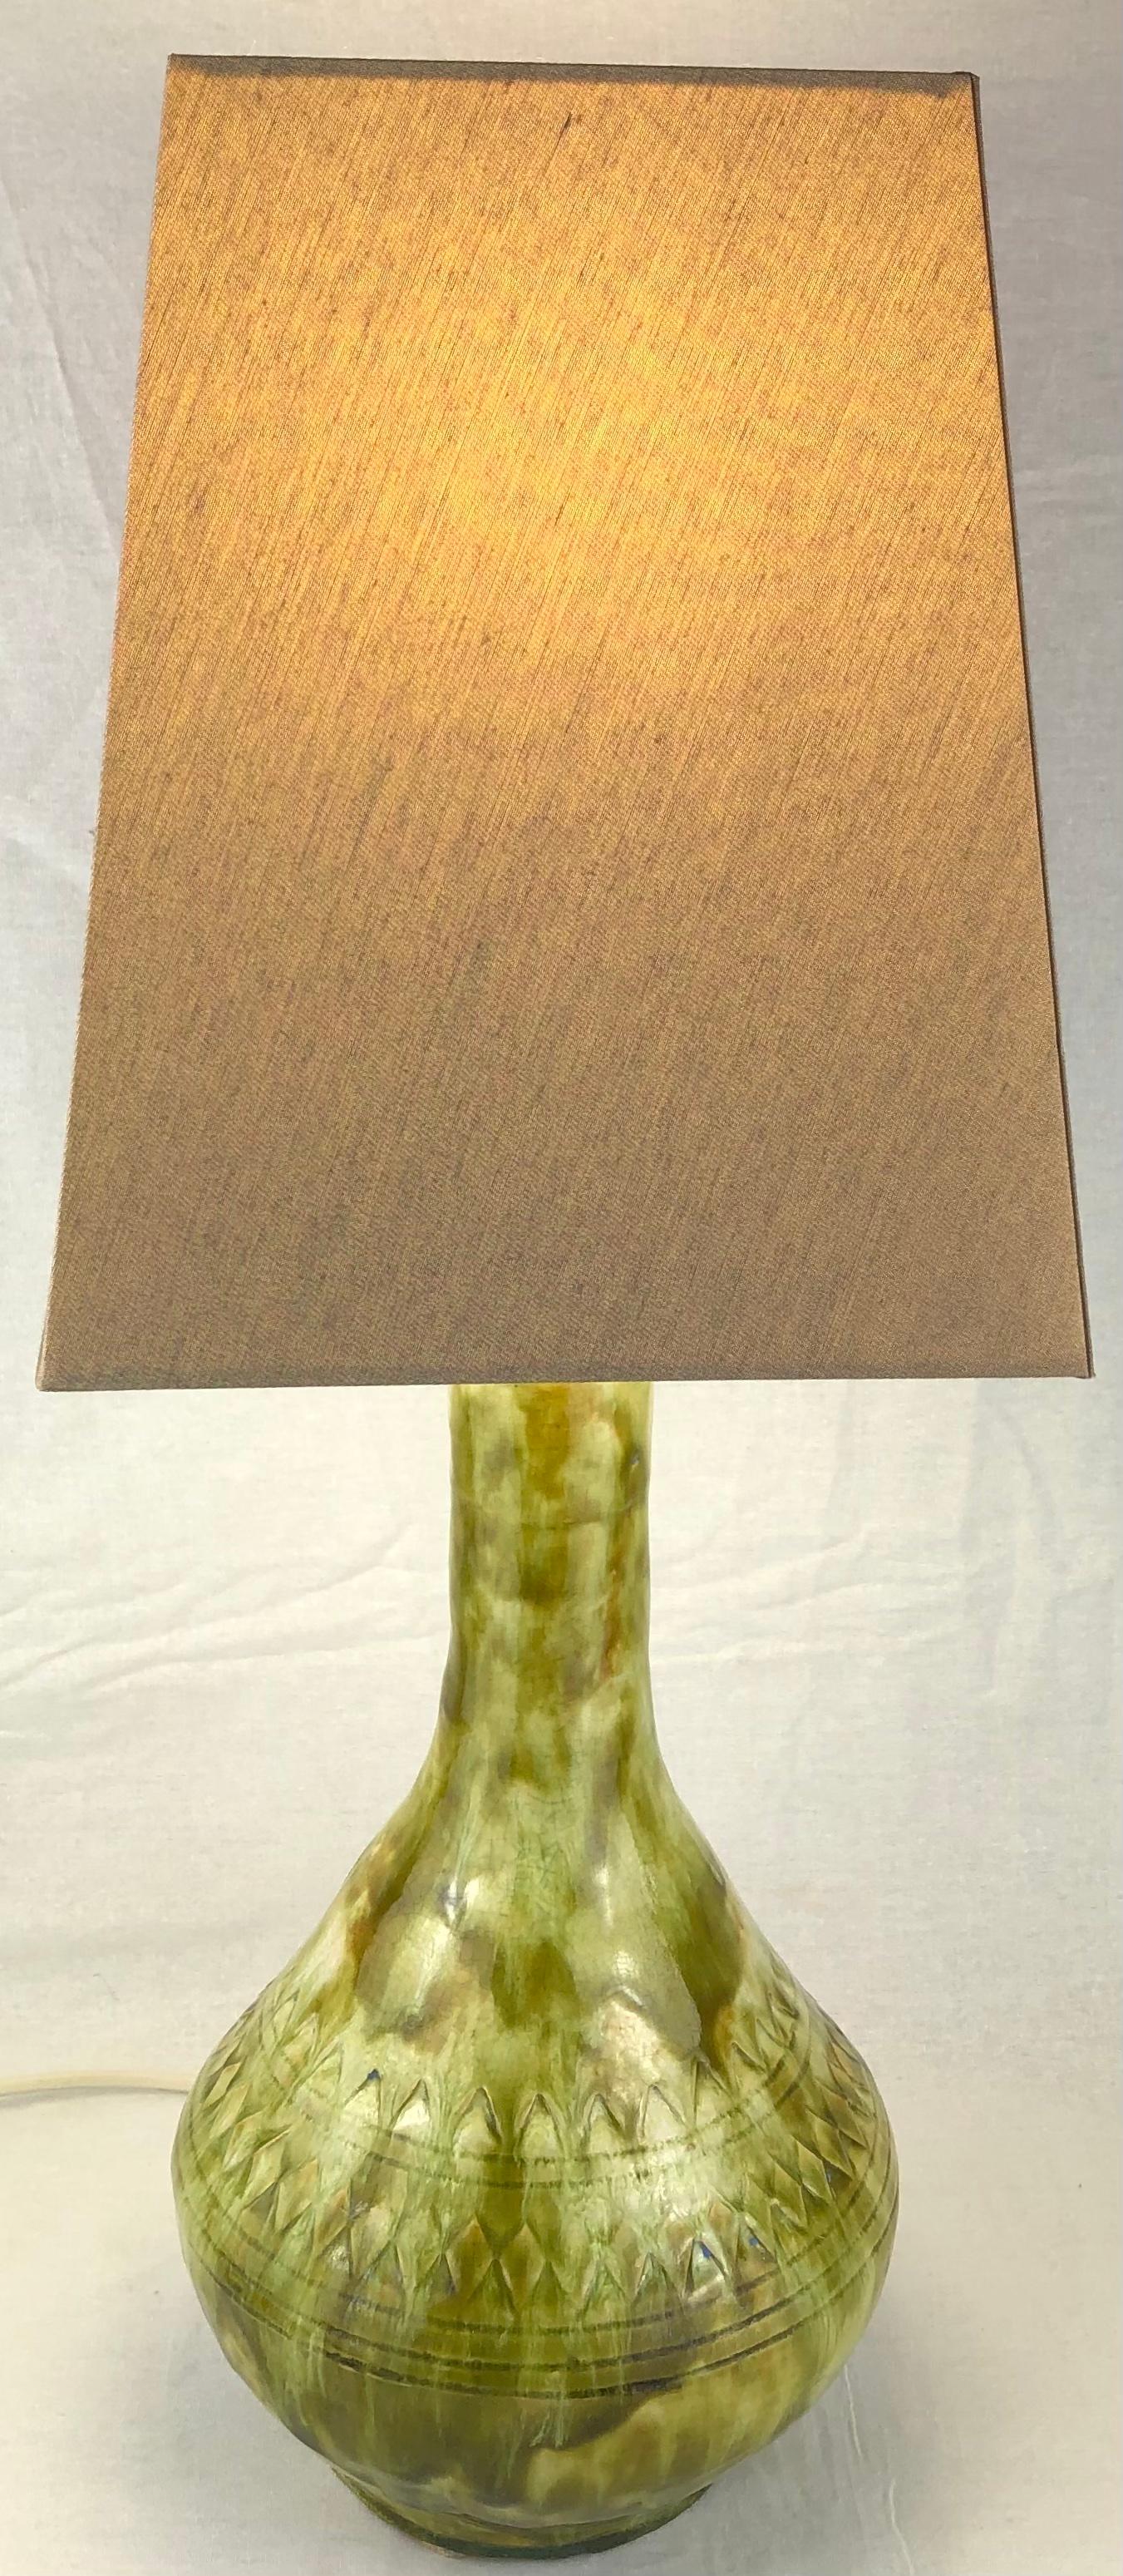 French Midcentury Glazed Ceramic Table Lamp In Good Condition For Sale In Miami, FL